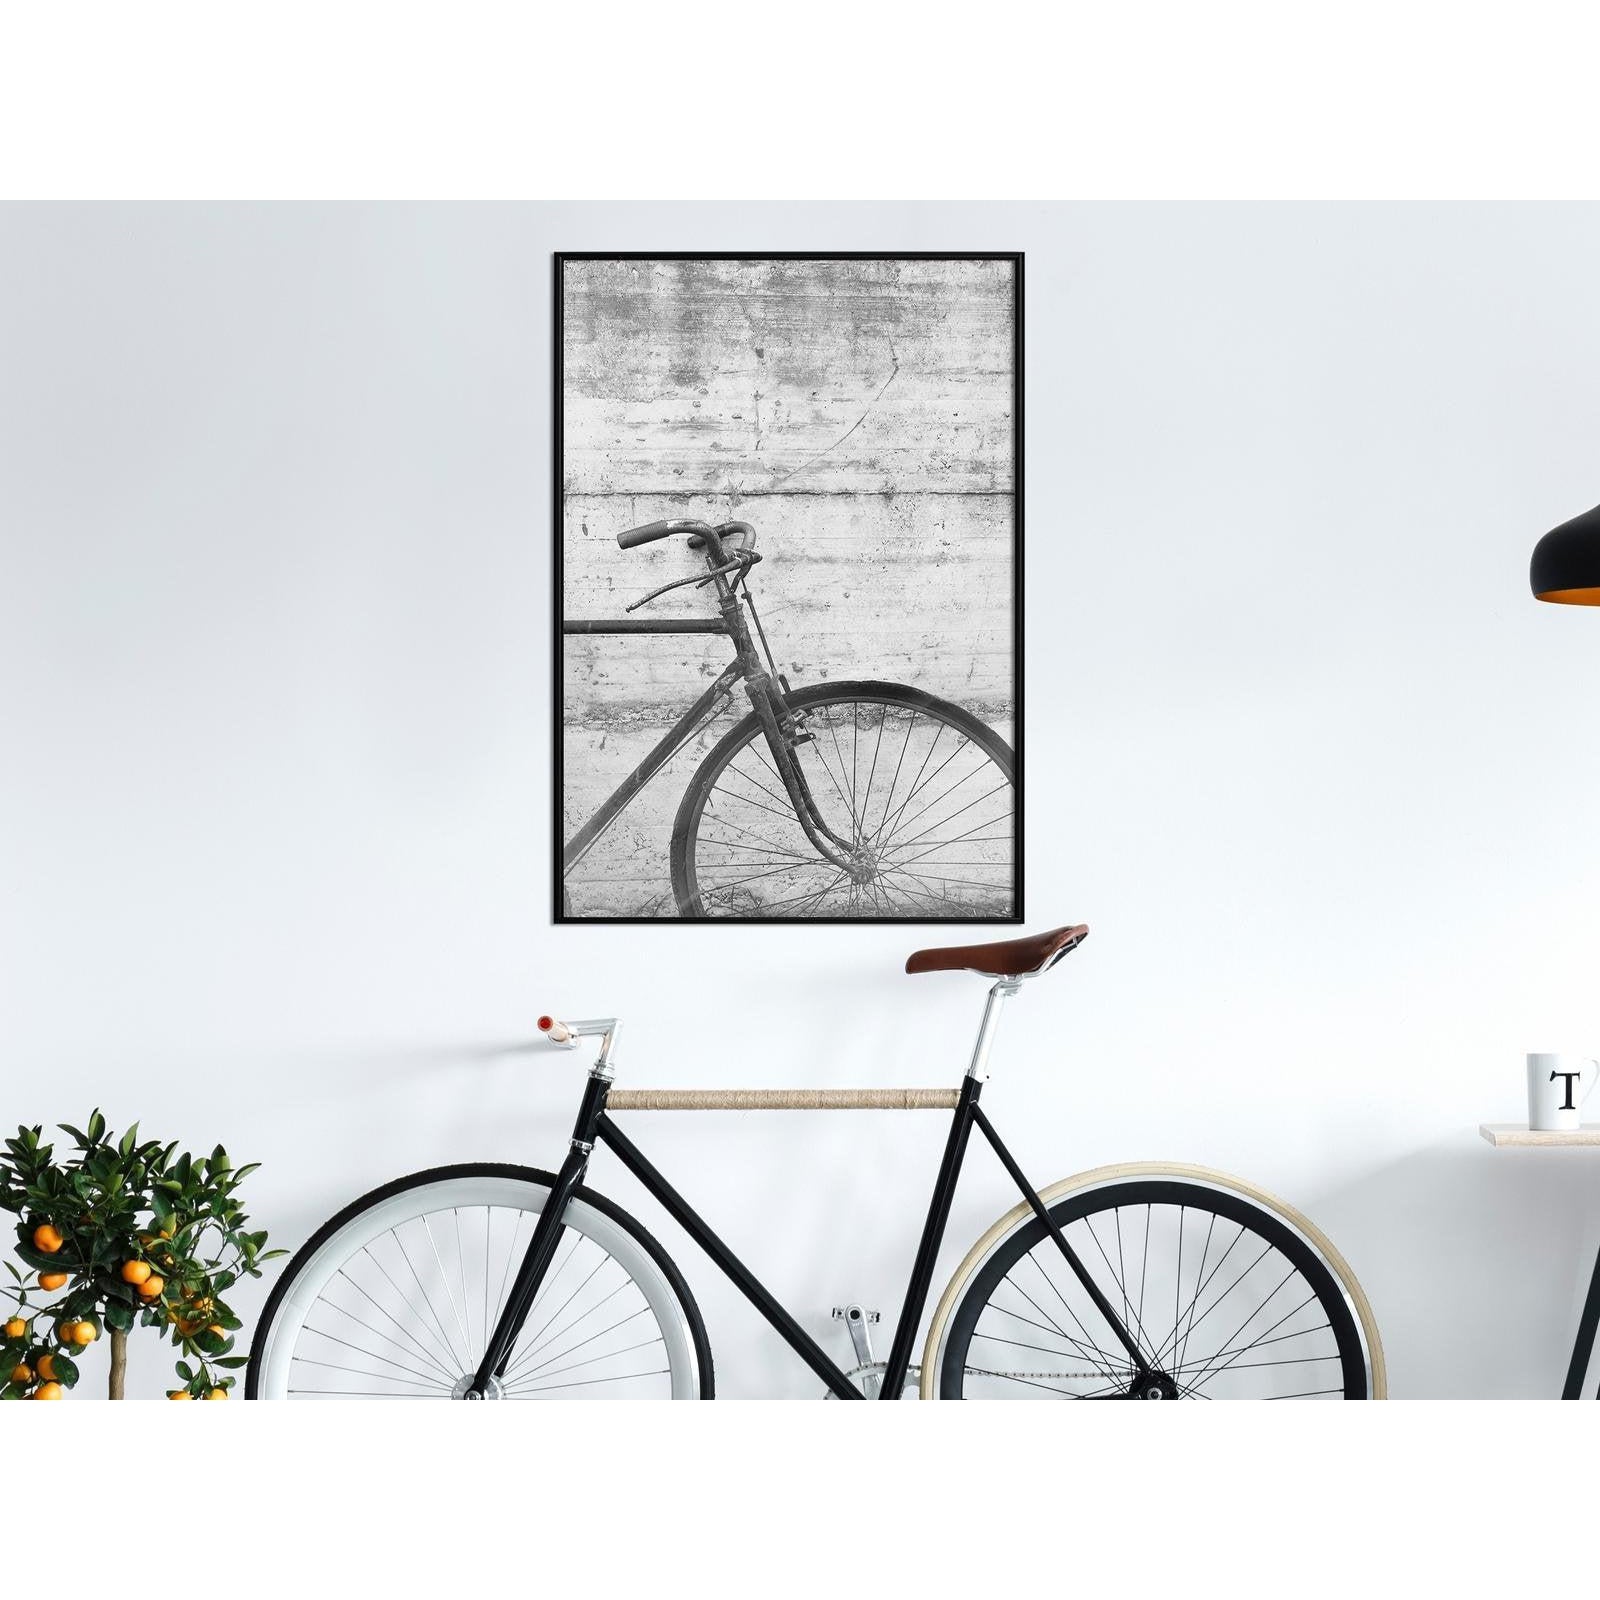 Inramad Poster / Tavla - Bicycle Leaning Against the Wall-Poster Inramad-Artgeist-peaceofhome.se